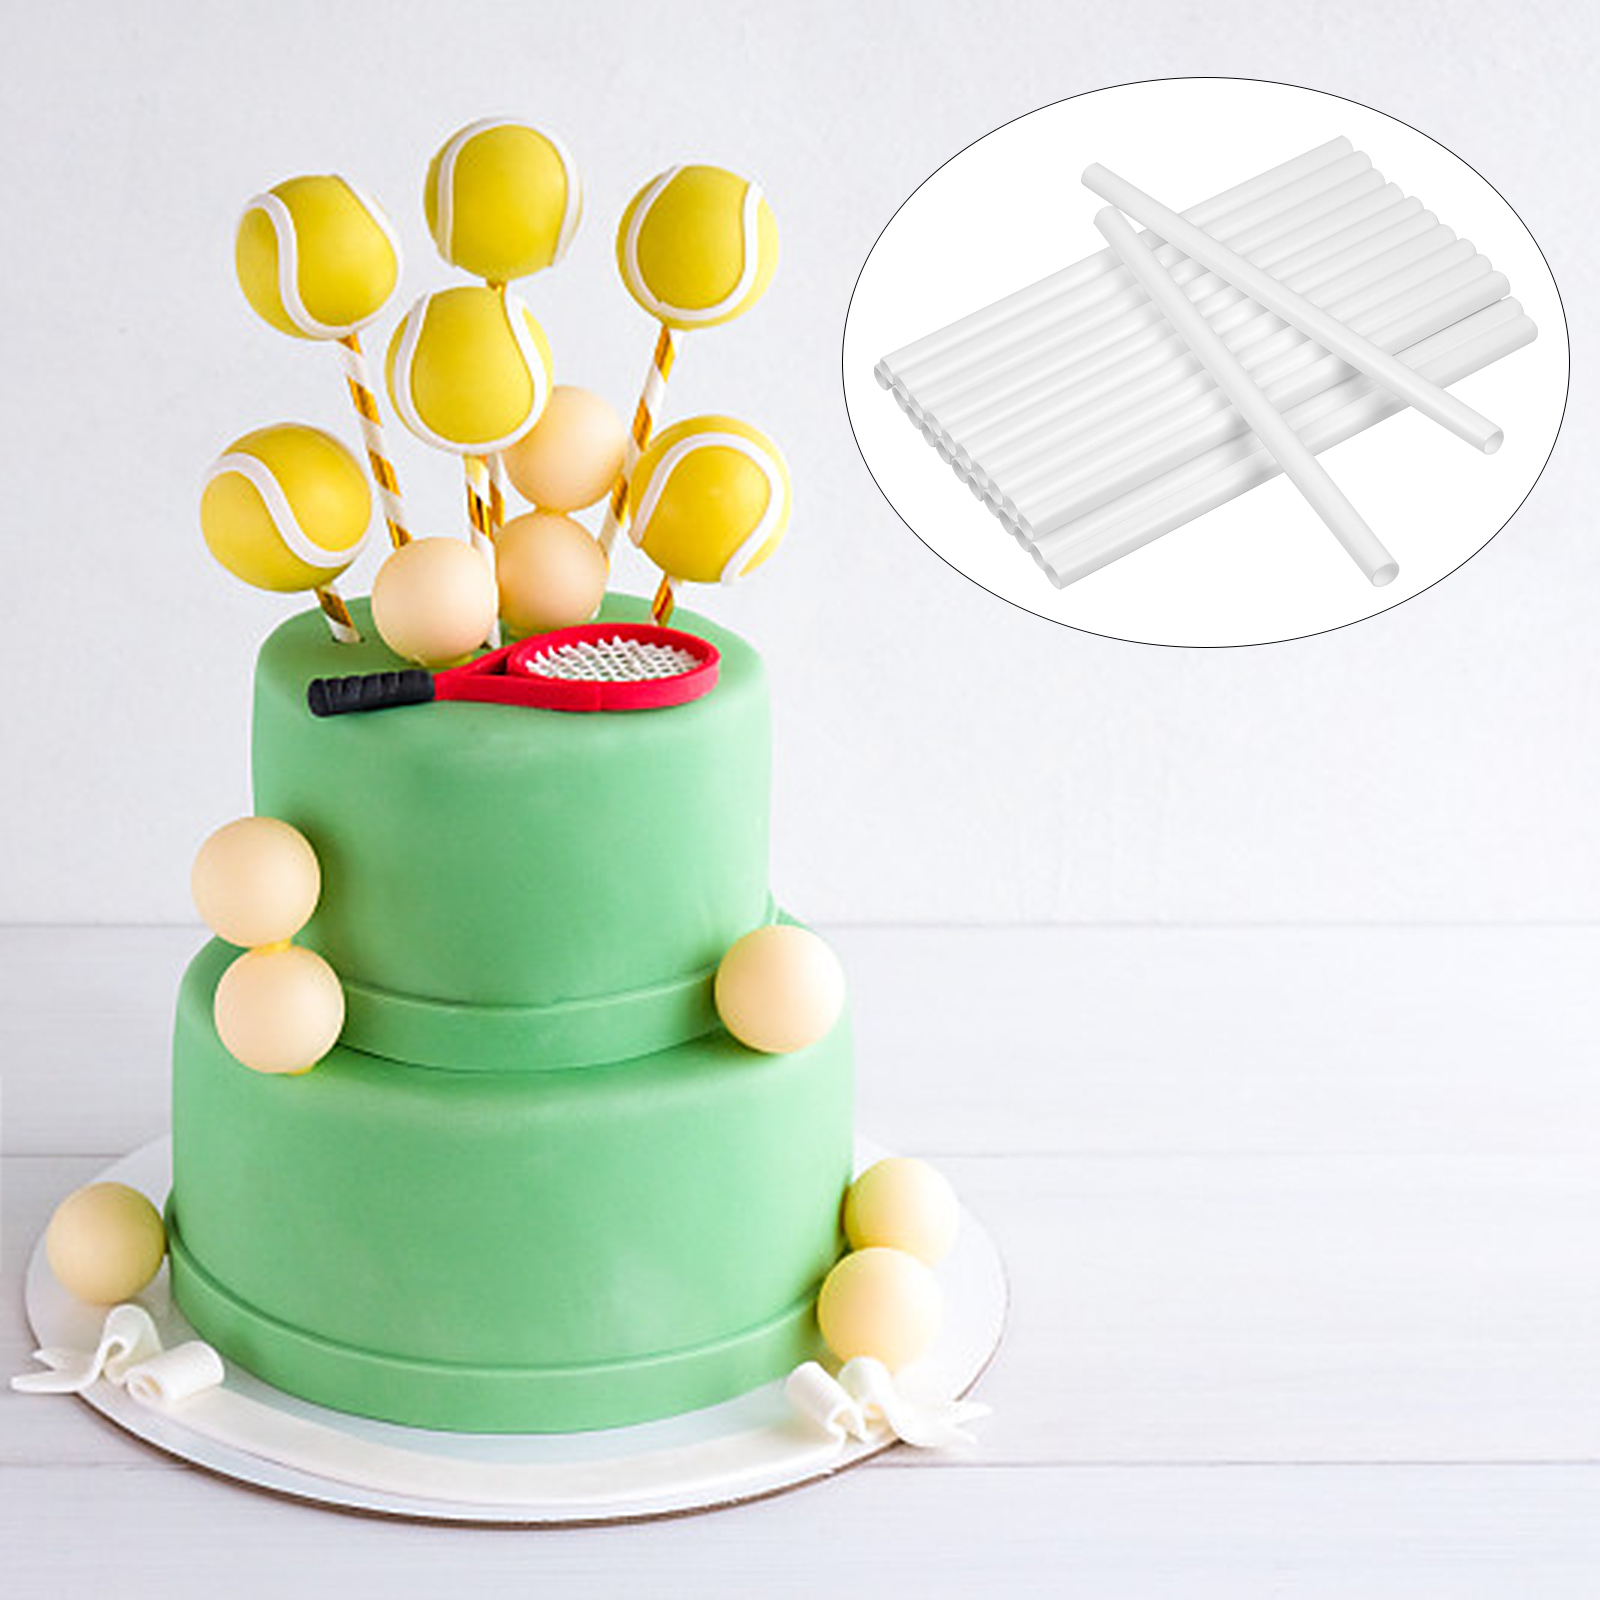 How to dowel a cake  Cake dowels, Cake decorating, Stacking a